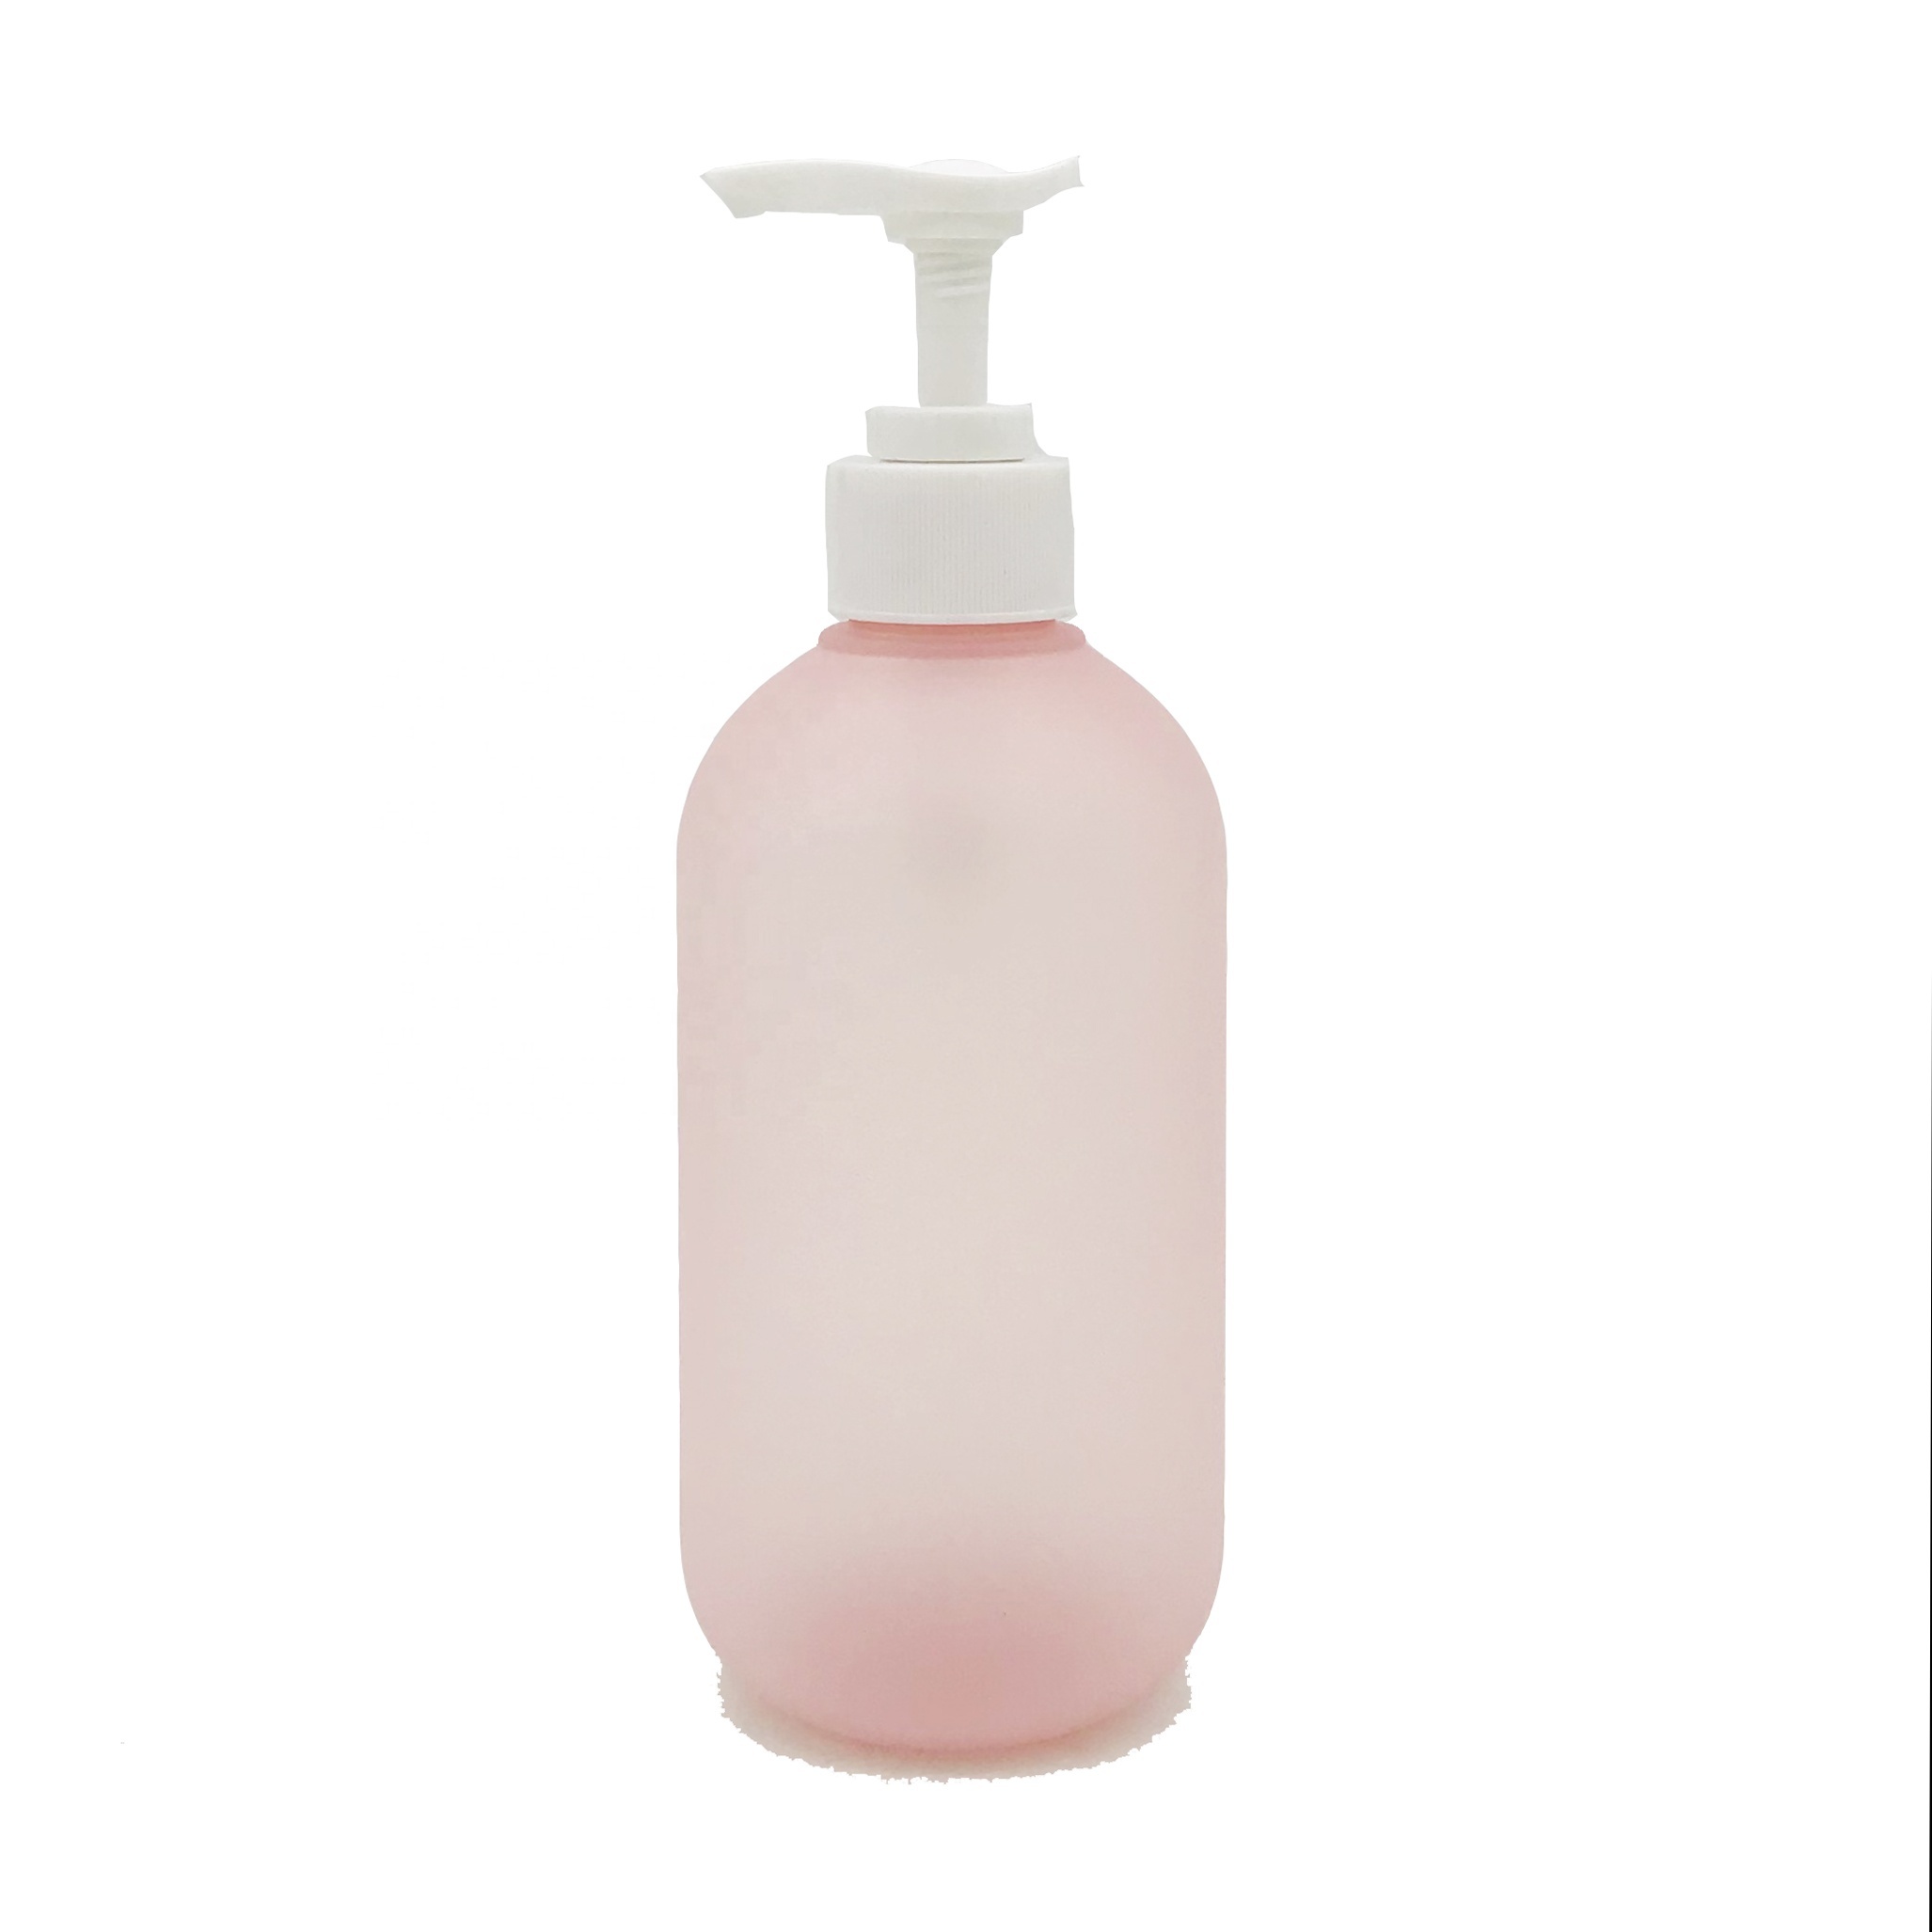 300 ML HDPE LOTION BOTTLE WITH DISPENSER PUMP